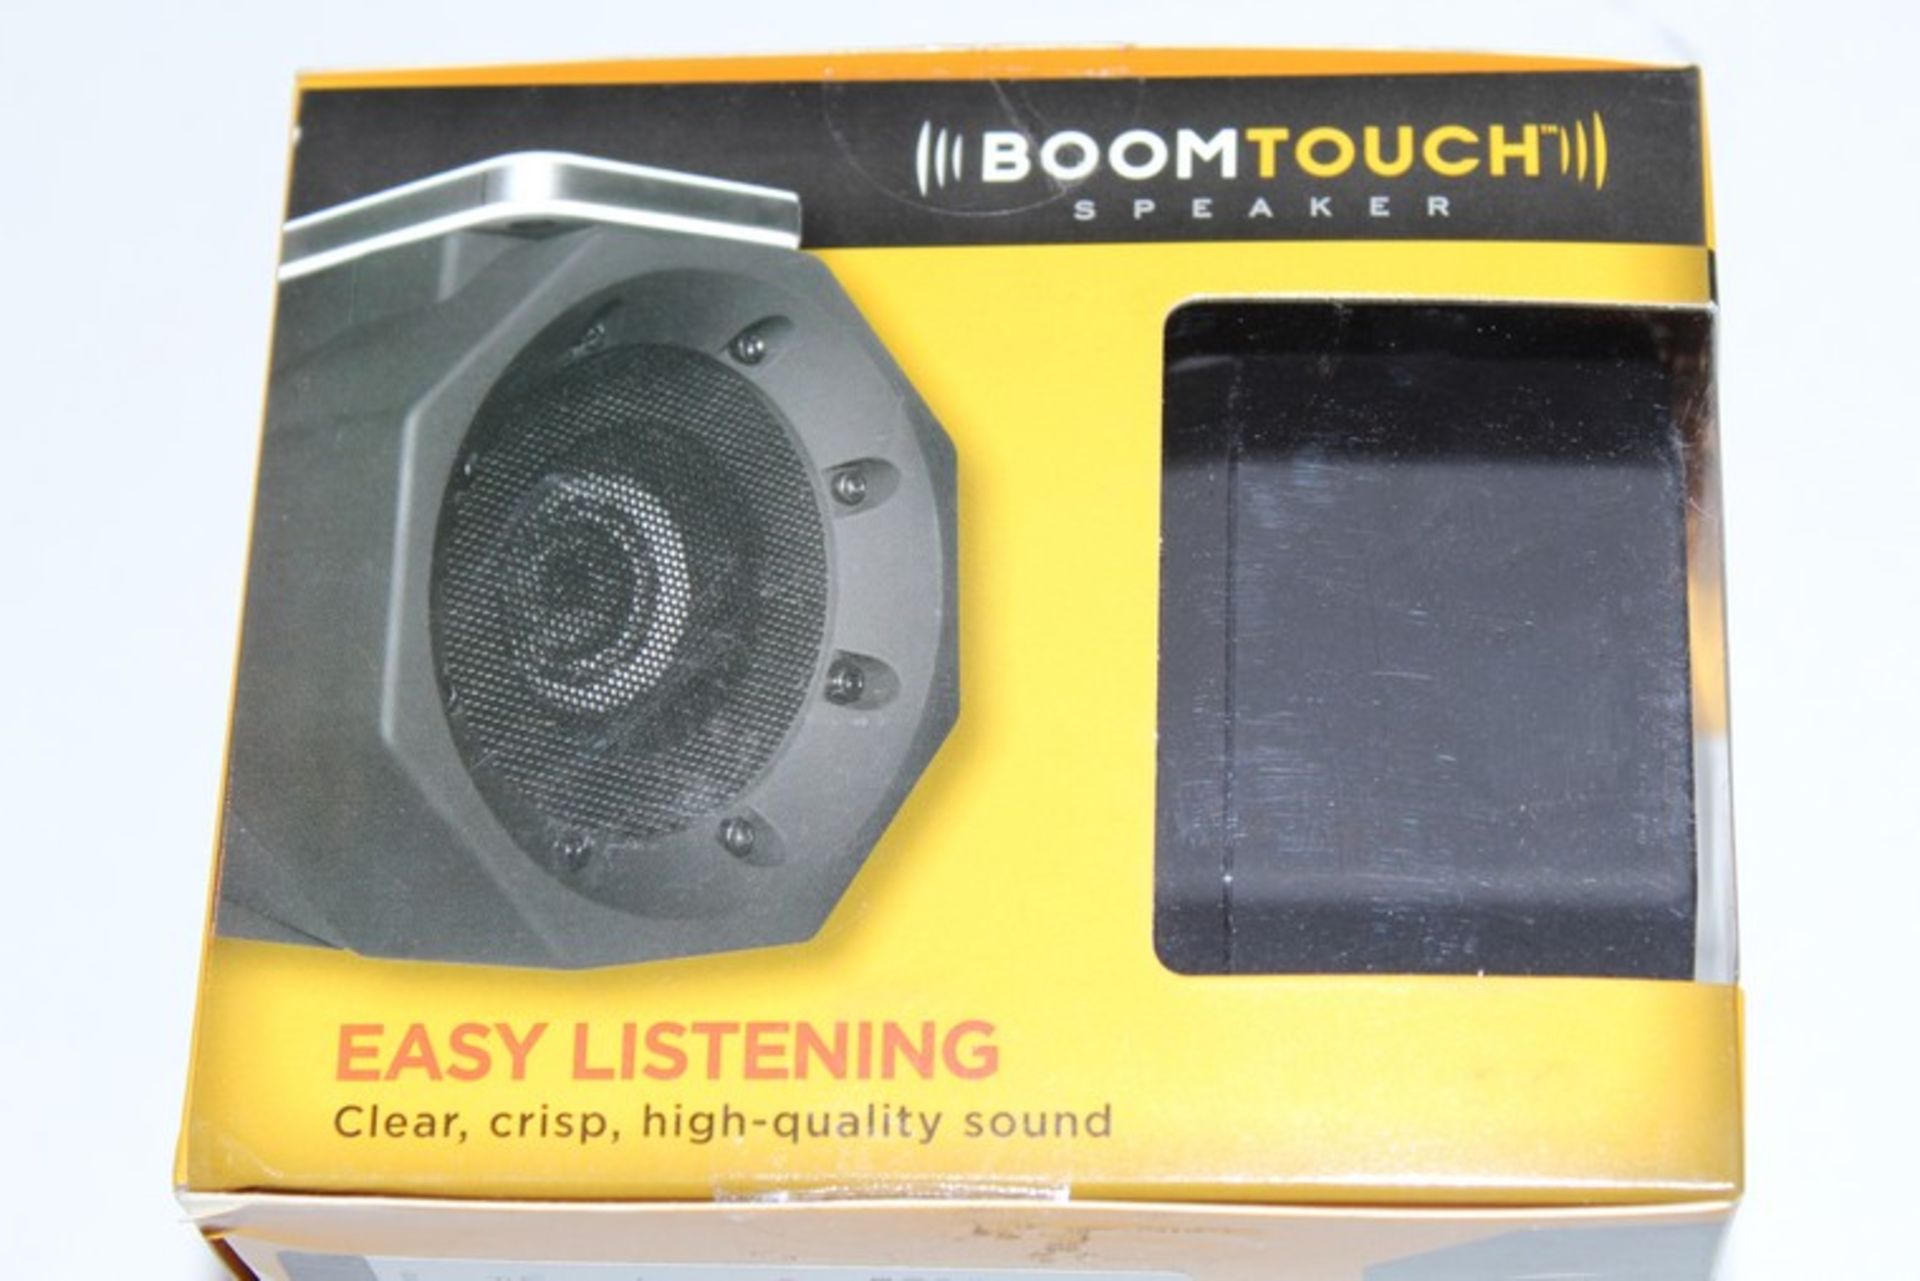 12 x BOXED BOOM TOUCH SPEAKERS (18.10.17) *PLEASE NOTE THAT THE BID PRICE IS MULTIPLIED BY THE